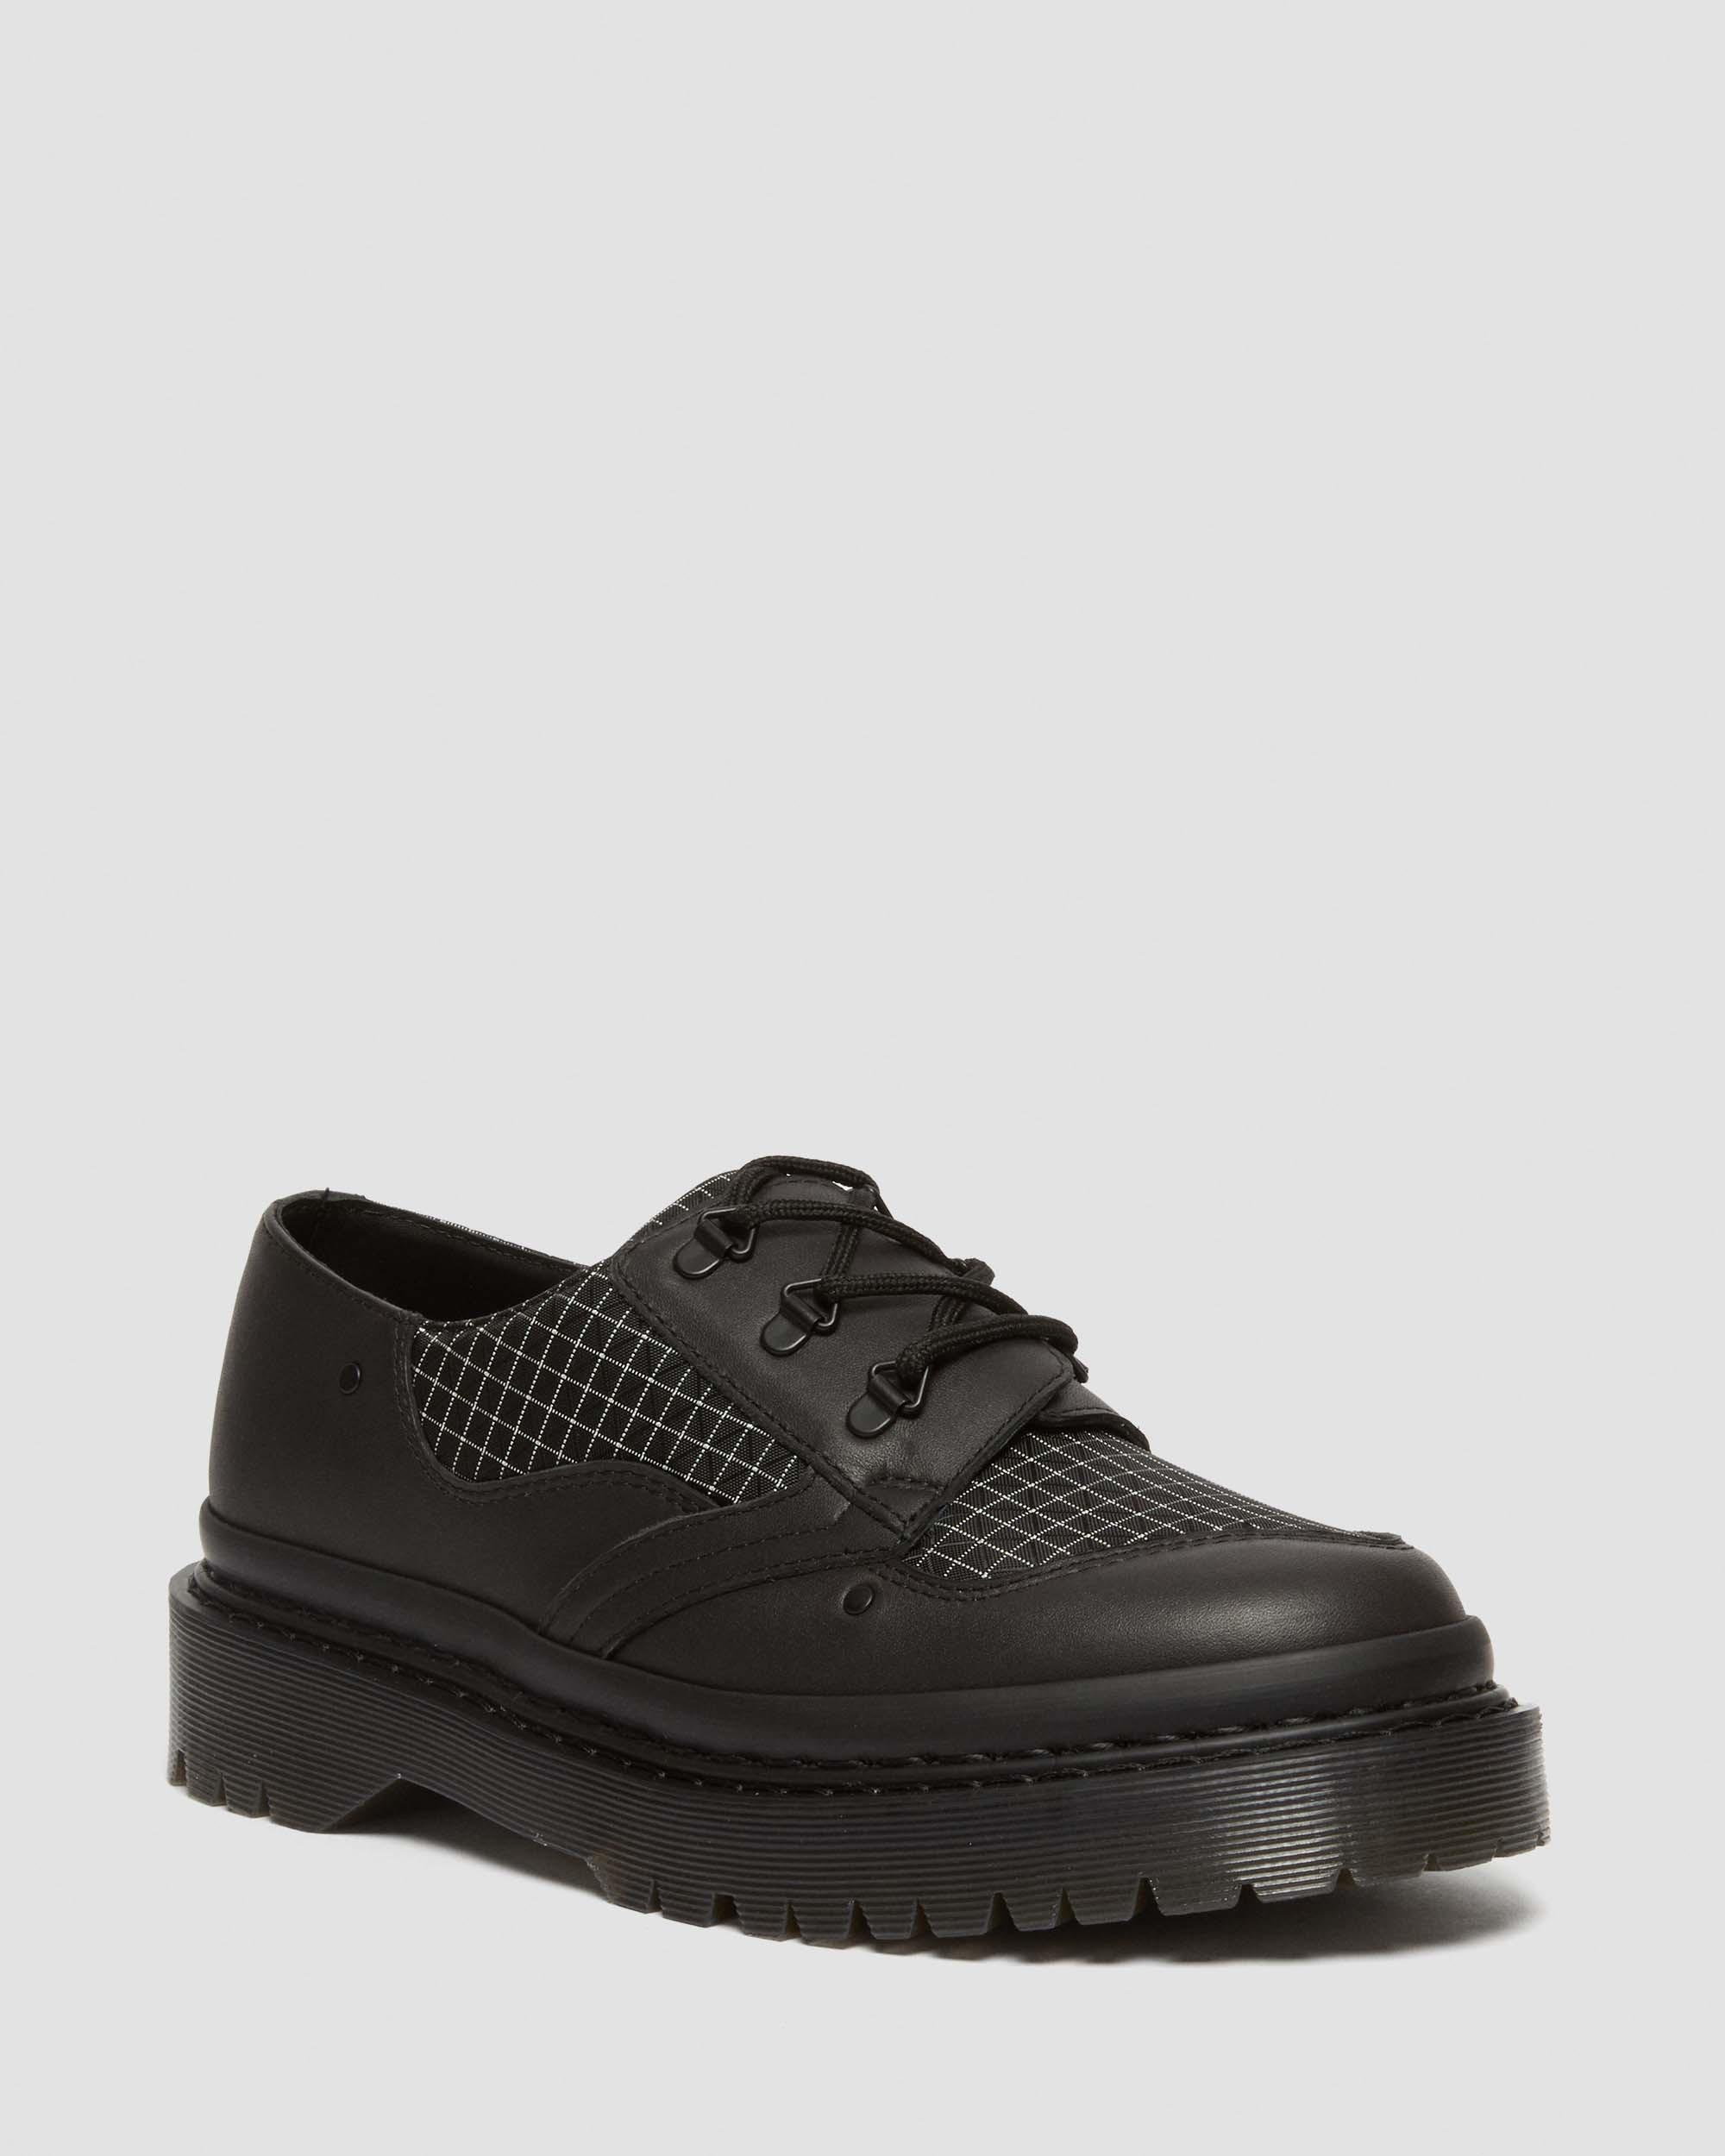 DR MARTENS 1461 Bex Ripstop Grid Oxford Shoes